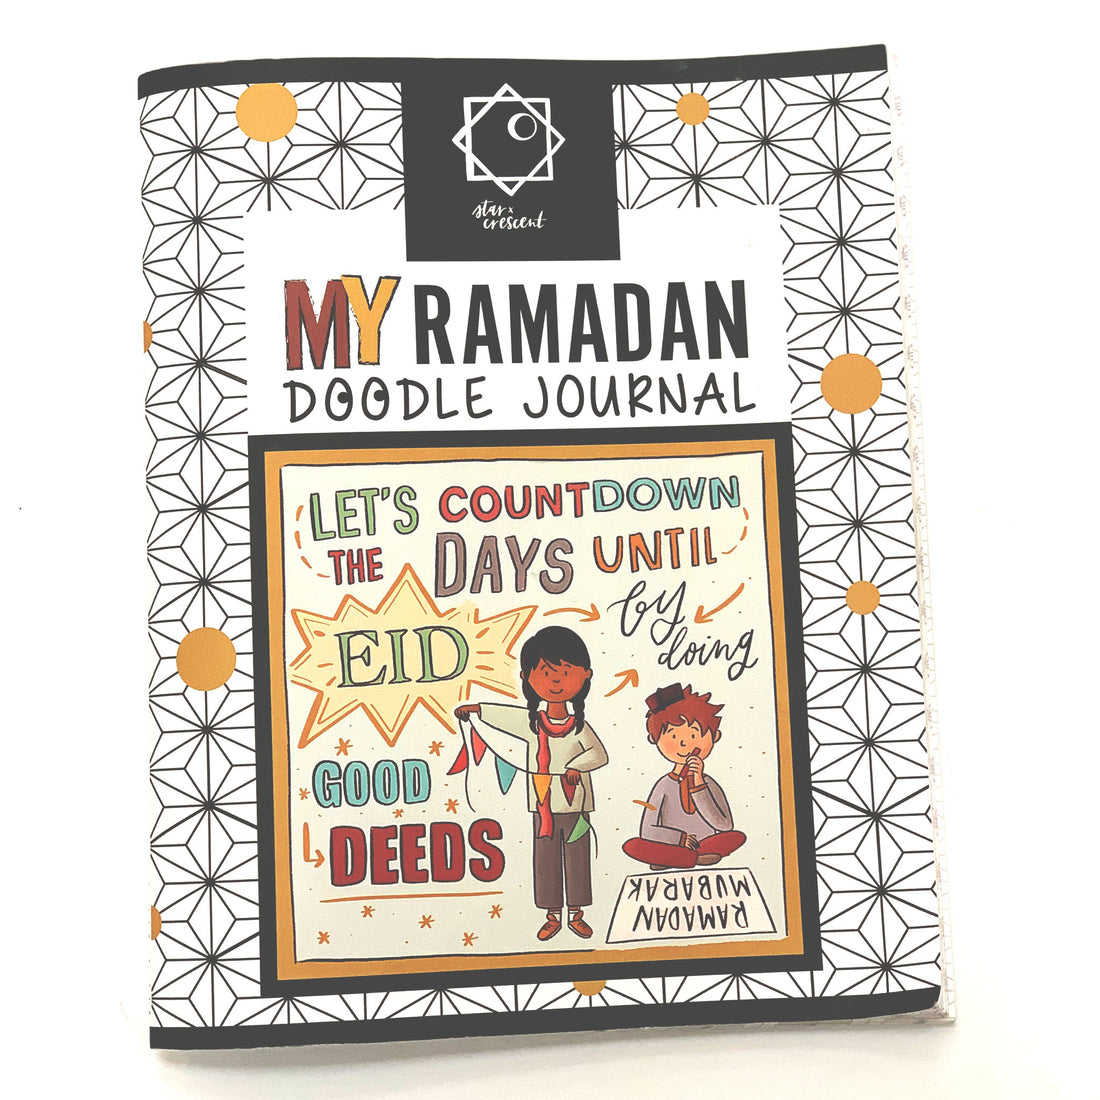 Free activities for Ramadan from our Ramadan doodle journal